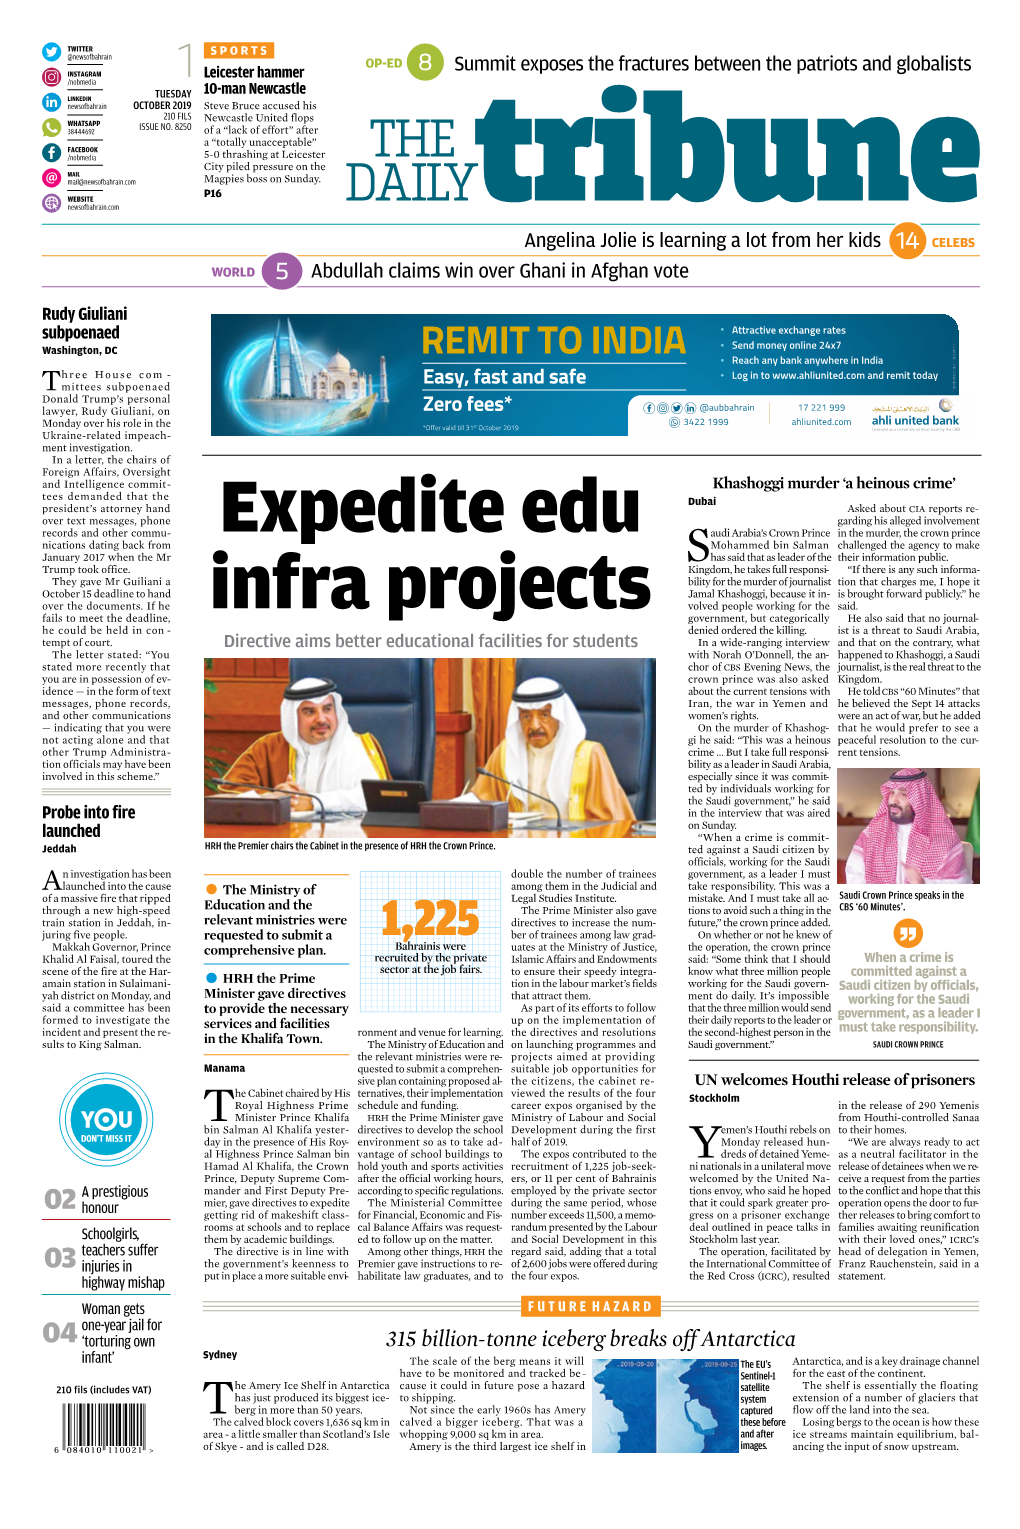 Expedite Edu Infra Projects